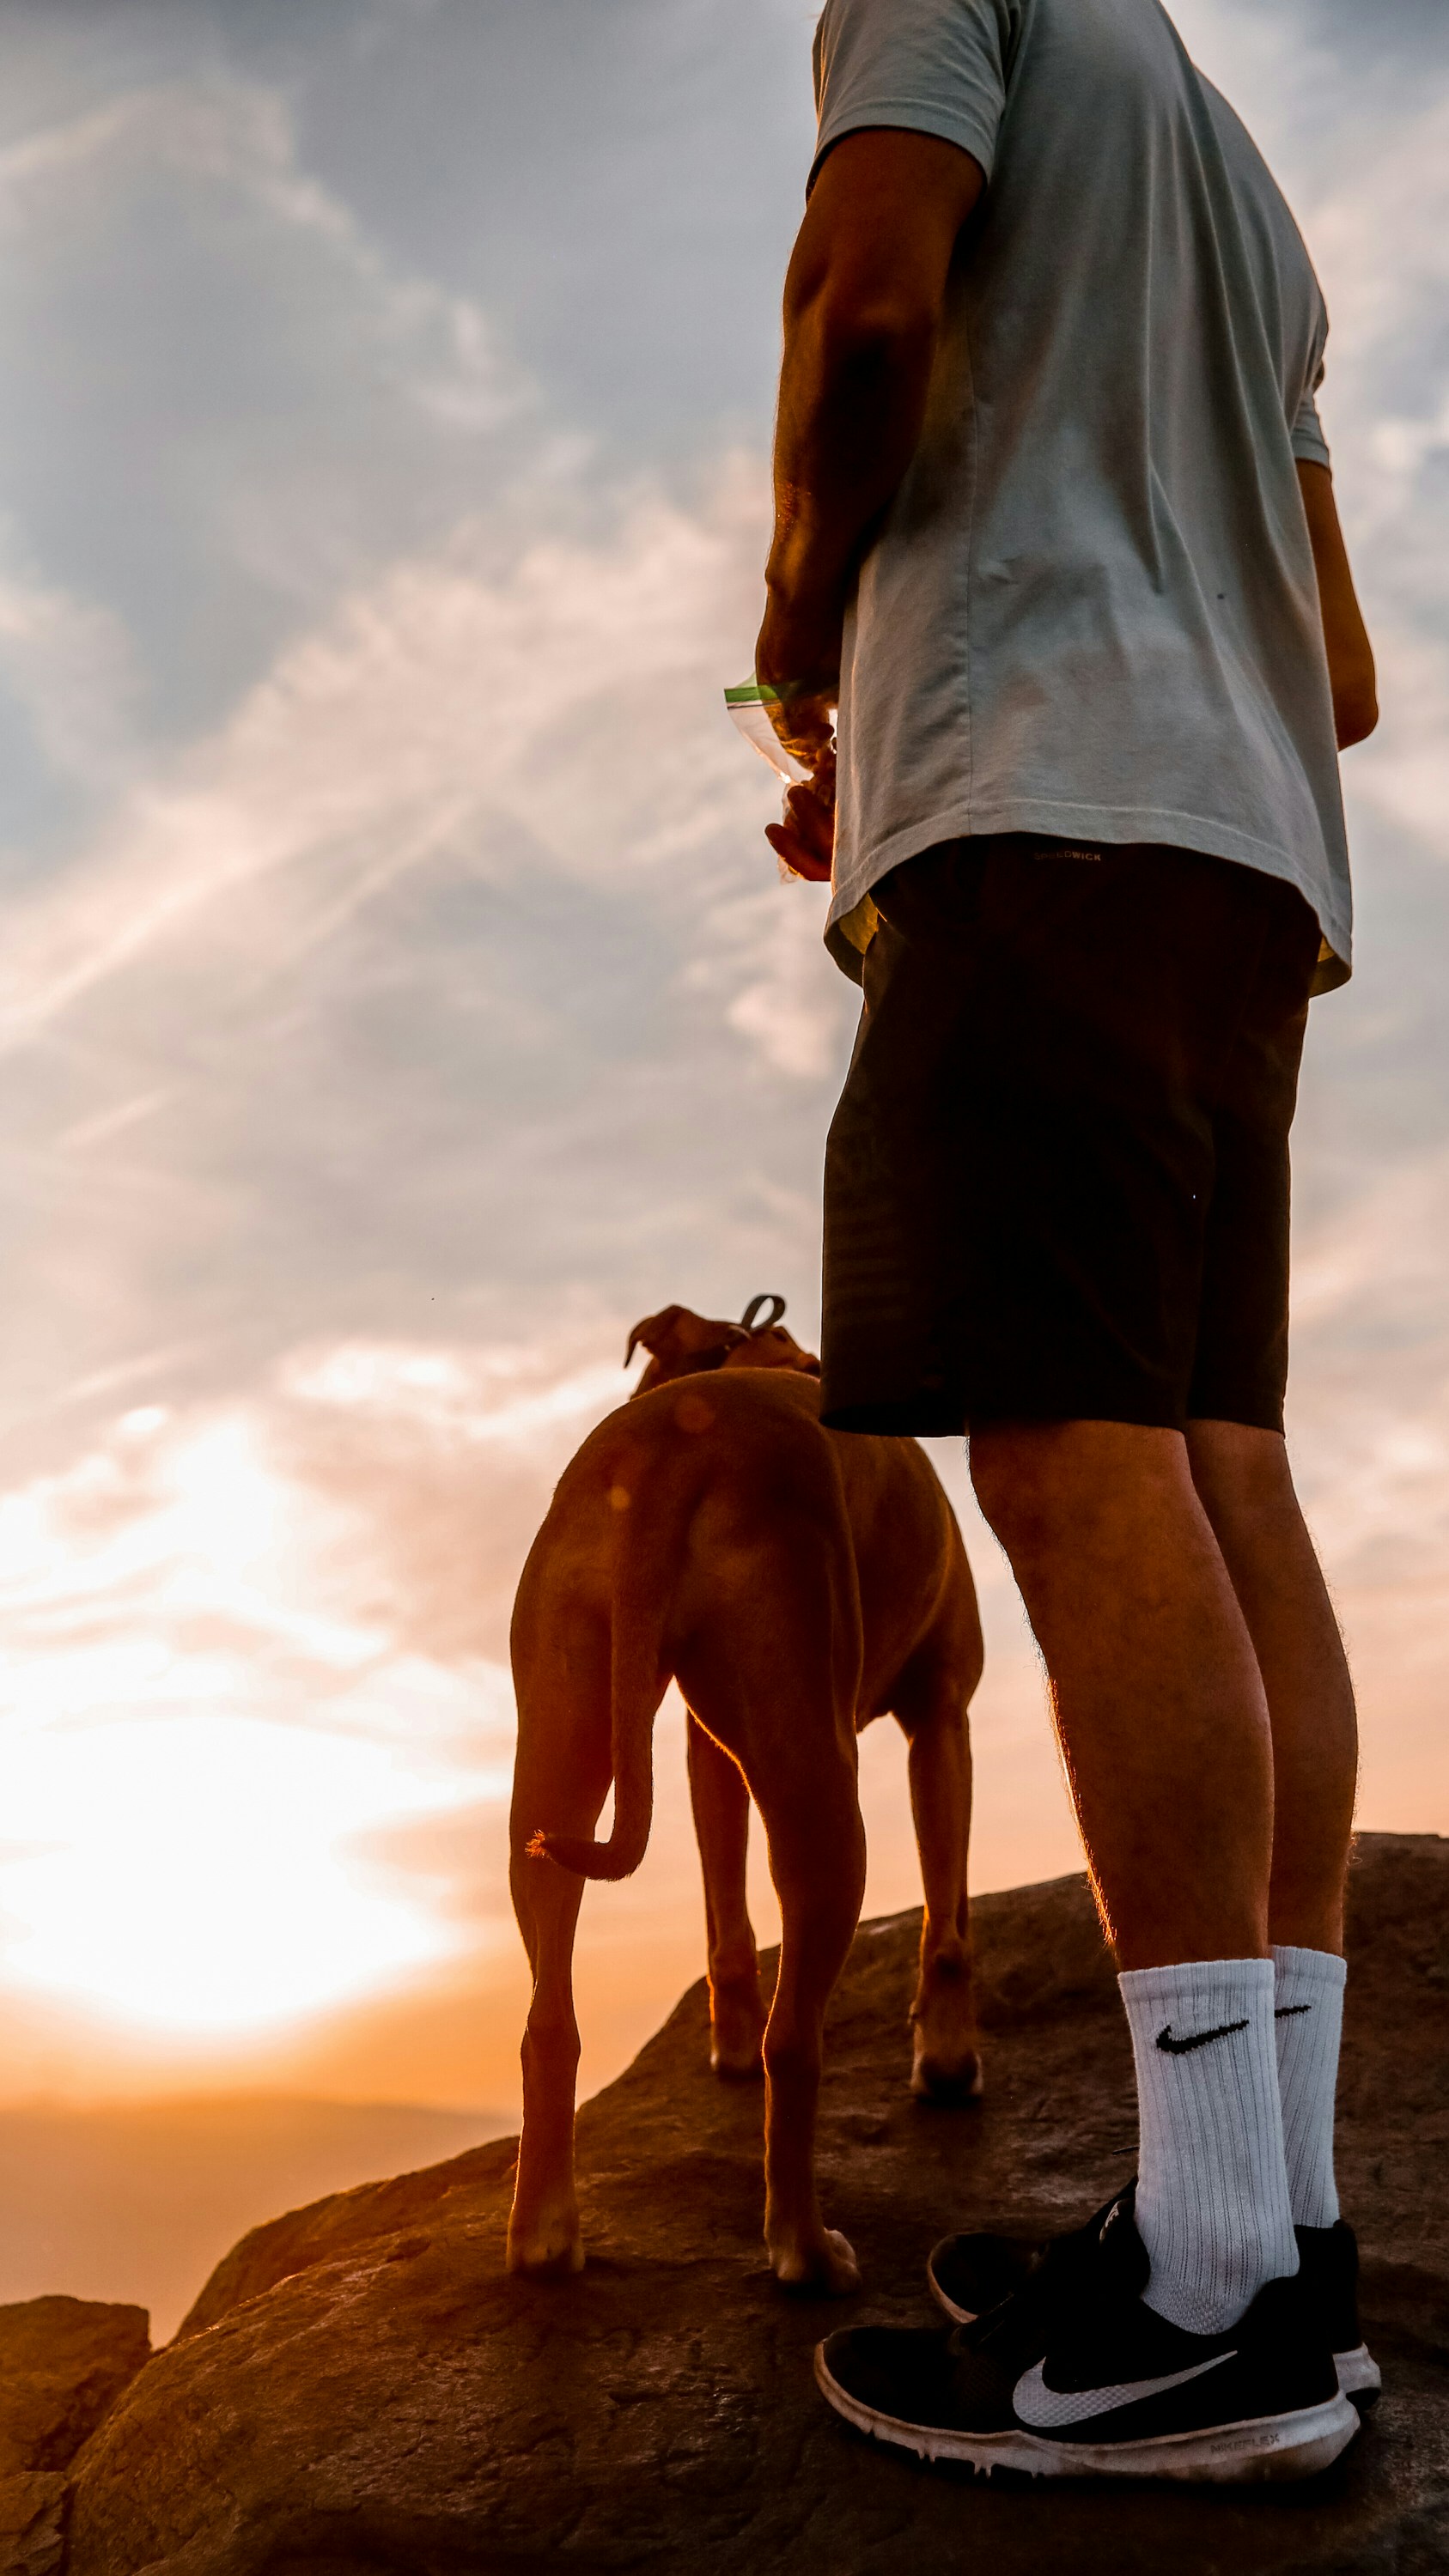 Man's best friend is something to behold in all forms: gorgeous Golden Retrievers, tiny yapping chihuahuas, fearsome pitbulls. Unsplash's community of incredible photographers has helped us curate an amazing selection of dog images that you can access and use free of charge.